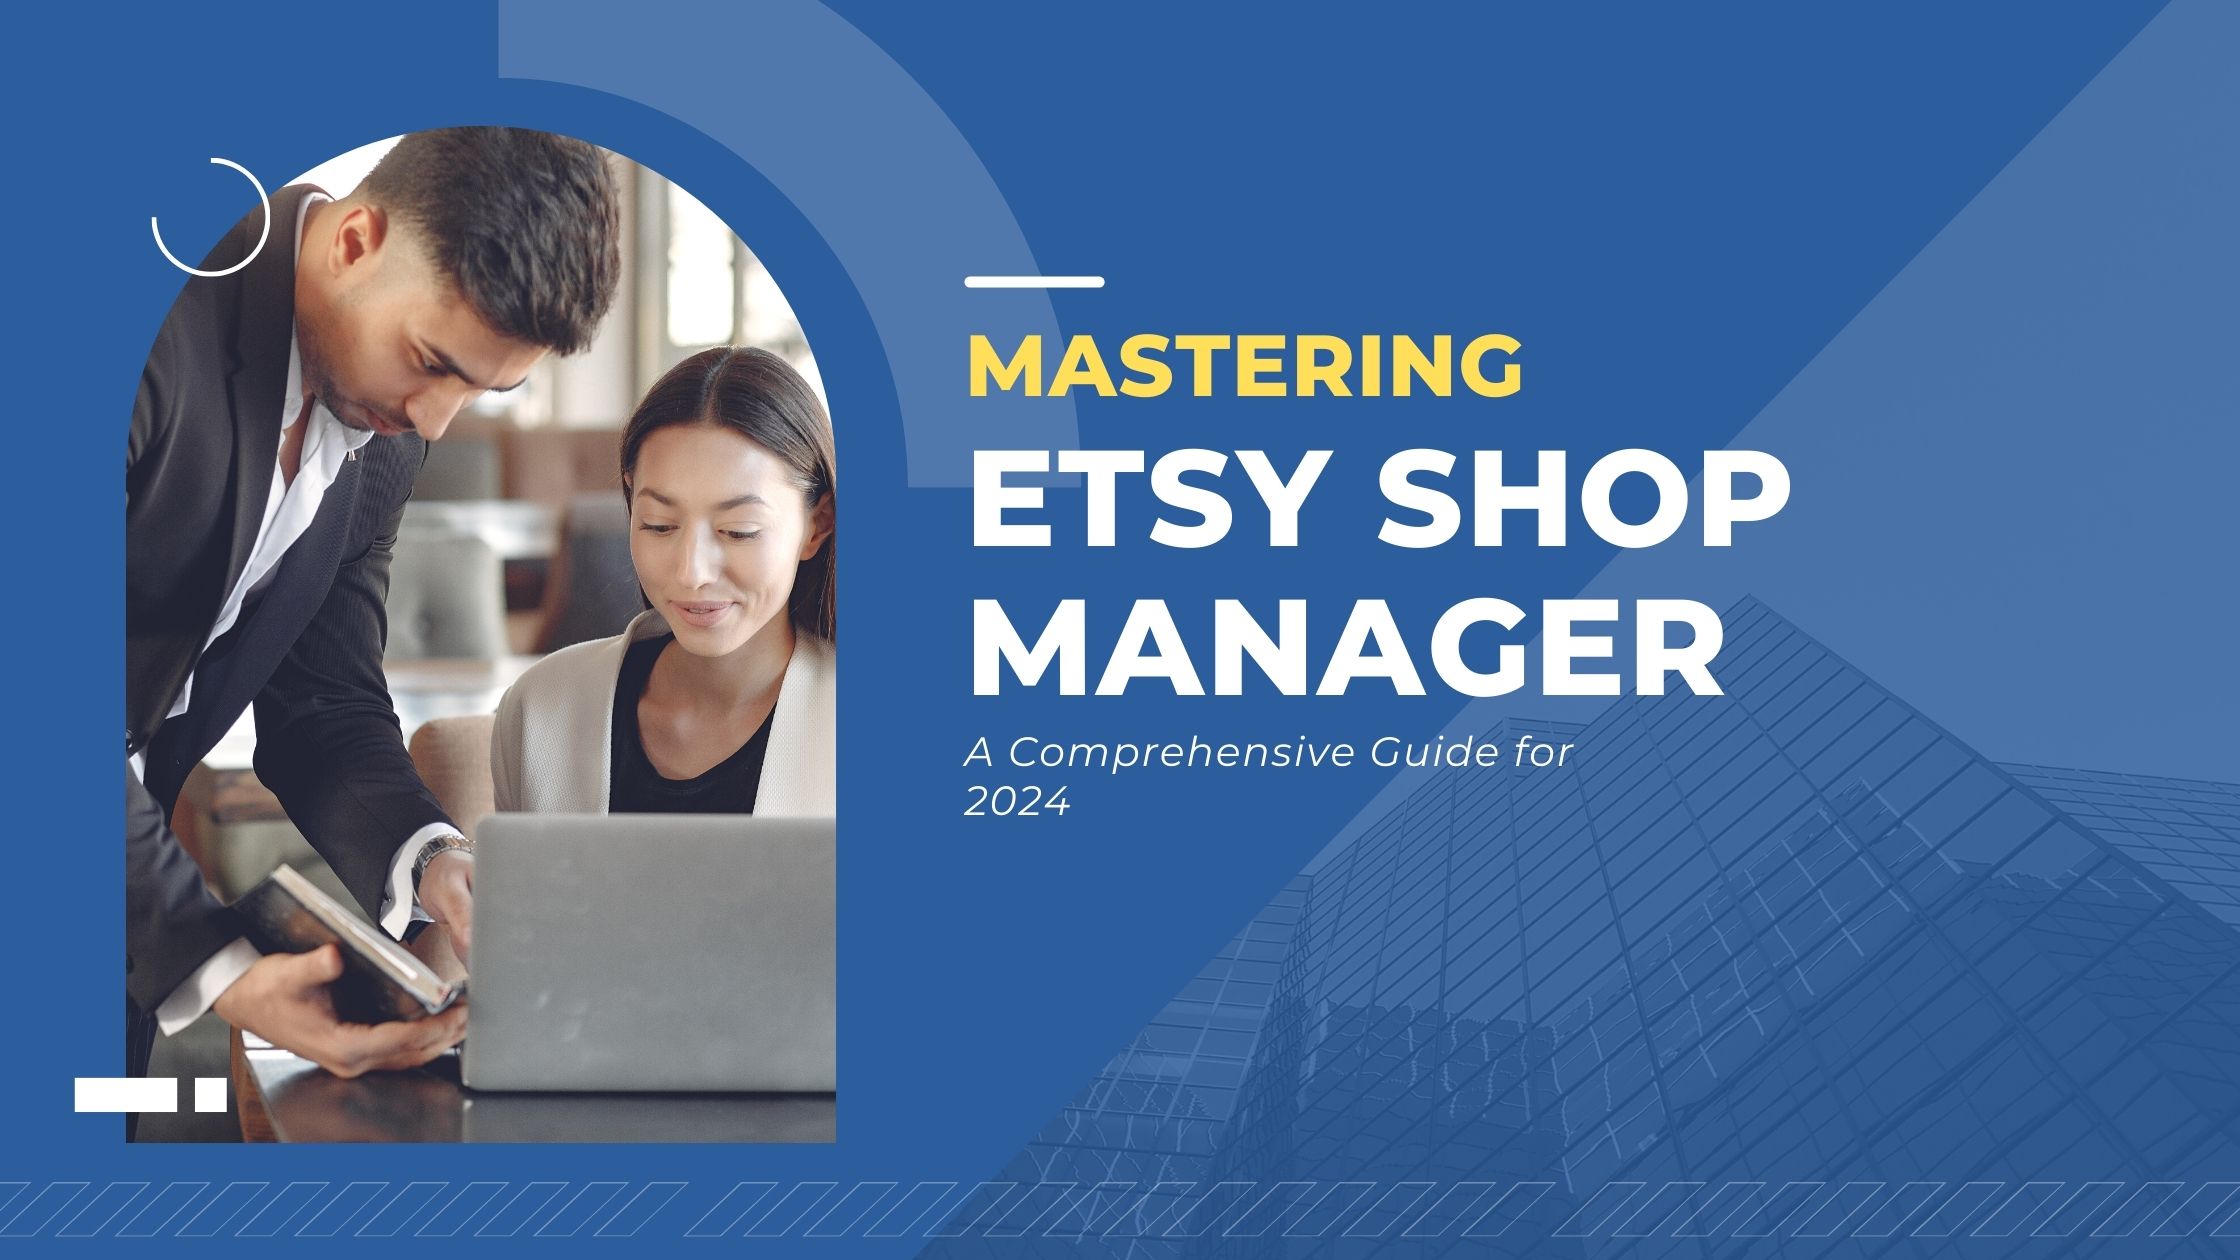 Mastering Etsy Shop Manager: A Comprehensive Guide for 2024